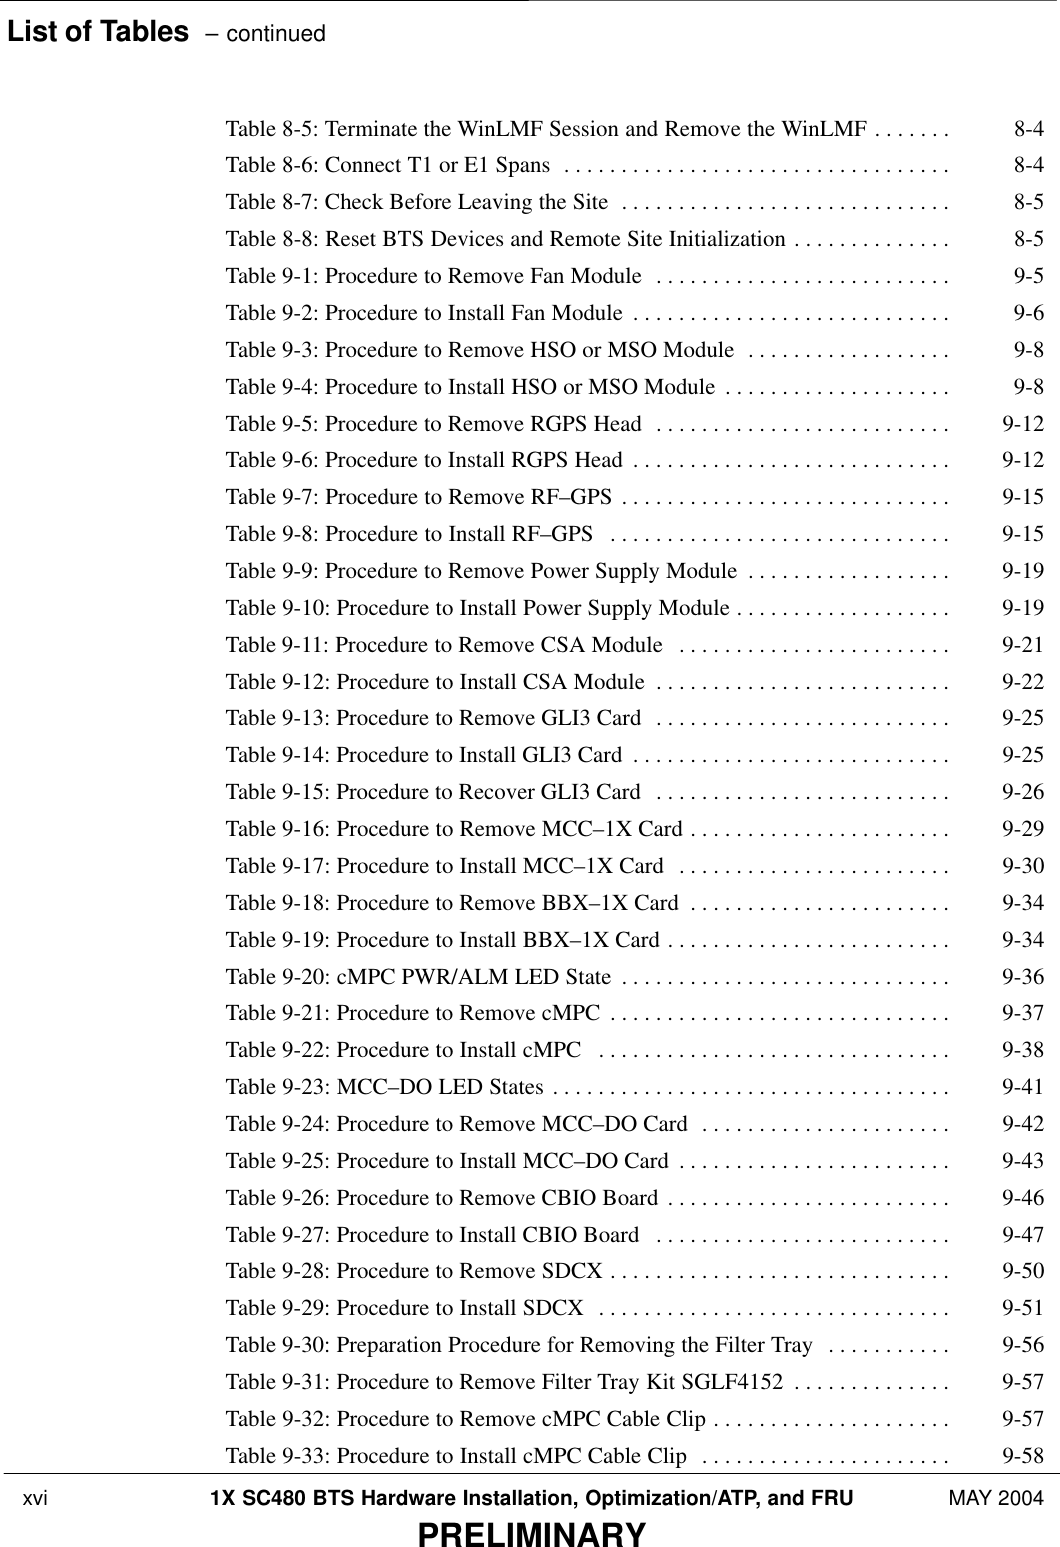 List of Tables  – continued xvi 1X SC480 BTS Hardware Installation, Optimization/ATP, and FRU MAY 2004PRELIMINARYTable 8-5: Terminate the WinLMF Session and Remove the WinLMF 8-4 . . . . . . . Table 8-6: Connect T1 or E1 Spans 8-4 . . . . . . . . . . . . . . . . . . . . . . . . . . . . . . . . . . Table 8-7: Check Before Leaving the Site 8-5 . . . . . . . . . . . . . . . . . . . . . . . . . . . . . Table 8-8: Reset BTS Devices and Remote Site Initialization 8-5 . . . . . . . . . . . . . . Table 9-1: Procedure to Remove Fan Module 9-5 . . . . . . . . . . . . . . . . . . . . . . . . . . Table 9-2: Procedure to Install Fan Module 9-6 . . . . . . . . . . . . . . . . . . . . . . . . . . . . Table 9-3: Procedure to Remove HSO or MSO Module 9-8 . . . . . . . . . . . . . . . . . . Table 9-4: Procedure to Install HSO or MSO Module 9-8 . . . . . . . . . . . . . . . . . . . . Table 9-5: Procedure to Remove RGPS Head 9-12 . . . . . . . . . . . . . . . . . . . . . . . . . . Table 9-6: Procedure to Install RGPS Head 9-12 . . . . . . . . . . . . . . . . . . . . . . . . . . . . Table 9-7: Procedure to Remove RF–GPS 9-15 . . . . . . . . . . . . . . . . . . . . . . . . . . . . . Table 9-8: Procedure to Install RF–GPS 9-15 . . . . . . . . . . . . . . . . . . . . . . . . . . . . . . Table 9-9: Procedure to Remove Power Supply Module 9-19 . . . . . . . . . . . . . . . . . . Table 9-10: Procedure to Install Power Supply Module 9-19 . . . . . . . . . . . . . . . . . . . Table 9-11: Procedure to Remove CSA Module 9-21 . . . . . . . . . . . . . . . . . . . . . . . . Table 9-12: Procedure to Install CSA Module 9-22 . . . . . . . . . . . . . . . . . . . . . . . . . . Table 9-13: Procedure to Remove GLI3 Card 9-25 . . . . . . . . . . . . . . . . . . . . . . . . . . Table 9-14: Procedure to Install GLI3 Card 9-25 . . . . . . . . . . . . . . . . . . . . . . . . . . . . Table 9-15: Procedure to Recover GLI3 Card 9-26 . . . . . . . . . . . . . . . . . . . . . . . . . . Table 9-16: Procedure to Remove MCC–1X Card 9-29 . . . . . . . . . . . . . . . . . . . . . . . Table 9-17: Procedure to Install MCC–1X Card 9-30 . . . . . . . . . . . . . . . . . . . . . . . . Table 9-18: Procedure to Remove BBX–1X Card 9-34 . . . . . . . . . . . . . . . . . . . . . . . Table 9-19: Procedure to Install BBX–1X Card 9-34 . . . . . . . . . . . . . . . . . . . . . . . . . Table 9-20: cMPC PWR/ALM LED State 9-36 . . . . . . . . . . . . . . . . . . . . . . . . . . . . . Table 9-21: Procedure to Remove cMPC 9-37 . . . . . . . . . . . . . . . . . . . . . . . . . . . . . . Table 9-22: Procedure to Install cMPC 9-38 . . . . . . . . . . . . . . . . . . . . . . . . . . . . . . . Table 9-23: MCC–DO LED States 9-41 . . . . . . . . . . . . . . . . . . . . . . . . . . . . . . . . . . . Table 9-24: Procedure to Remove MCC–DO Card 9-42 . . . . . . . . . . . . . . . . . . . . . . Table 9-25: Procedure to Install MCC–DO Card 9-43 . . . . . . . . . . . . . . . . . . . . . . . . Table 9-26: Procedure to Remove CBIO Board 9-46 . . . . . . . . . . . . . . . . . . . . . . . . . Table 9-27: Procedure to Install CBIO Board 9-47 . . . . . . . . . . . . . . . . . . . . . . . . . . Table 9-28: Procedure to Remove SDCX 9-50 . . . . . . . . . . . . . . . . . . . . . . . . . . . . . . Table 9-29: Procedure to Install SDCX 9-51 . . . . . . . . . . . . . . . . . . . . . . . . . . . . . . . Table 9-30: Preparation Procedure for Removing the Filter Tray 9-56 . . . . . . . . . . . Table 9-31: Procedure to Remove Filter Tray Kit SGLF4152 9-57 . . . . . . . . . . . . . . Table 9-32: Procedure to Remove cMPC Cable Clip 9-57 . . . . . . . . . . . . . . . . . . . . . Table 9-33: Procedure to Install cMPC Cable Clip 9-58 . . . . . . . . . . . . . . . . . . . . . . 